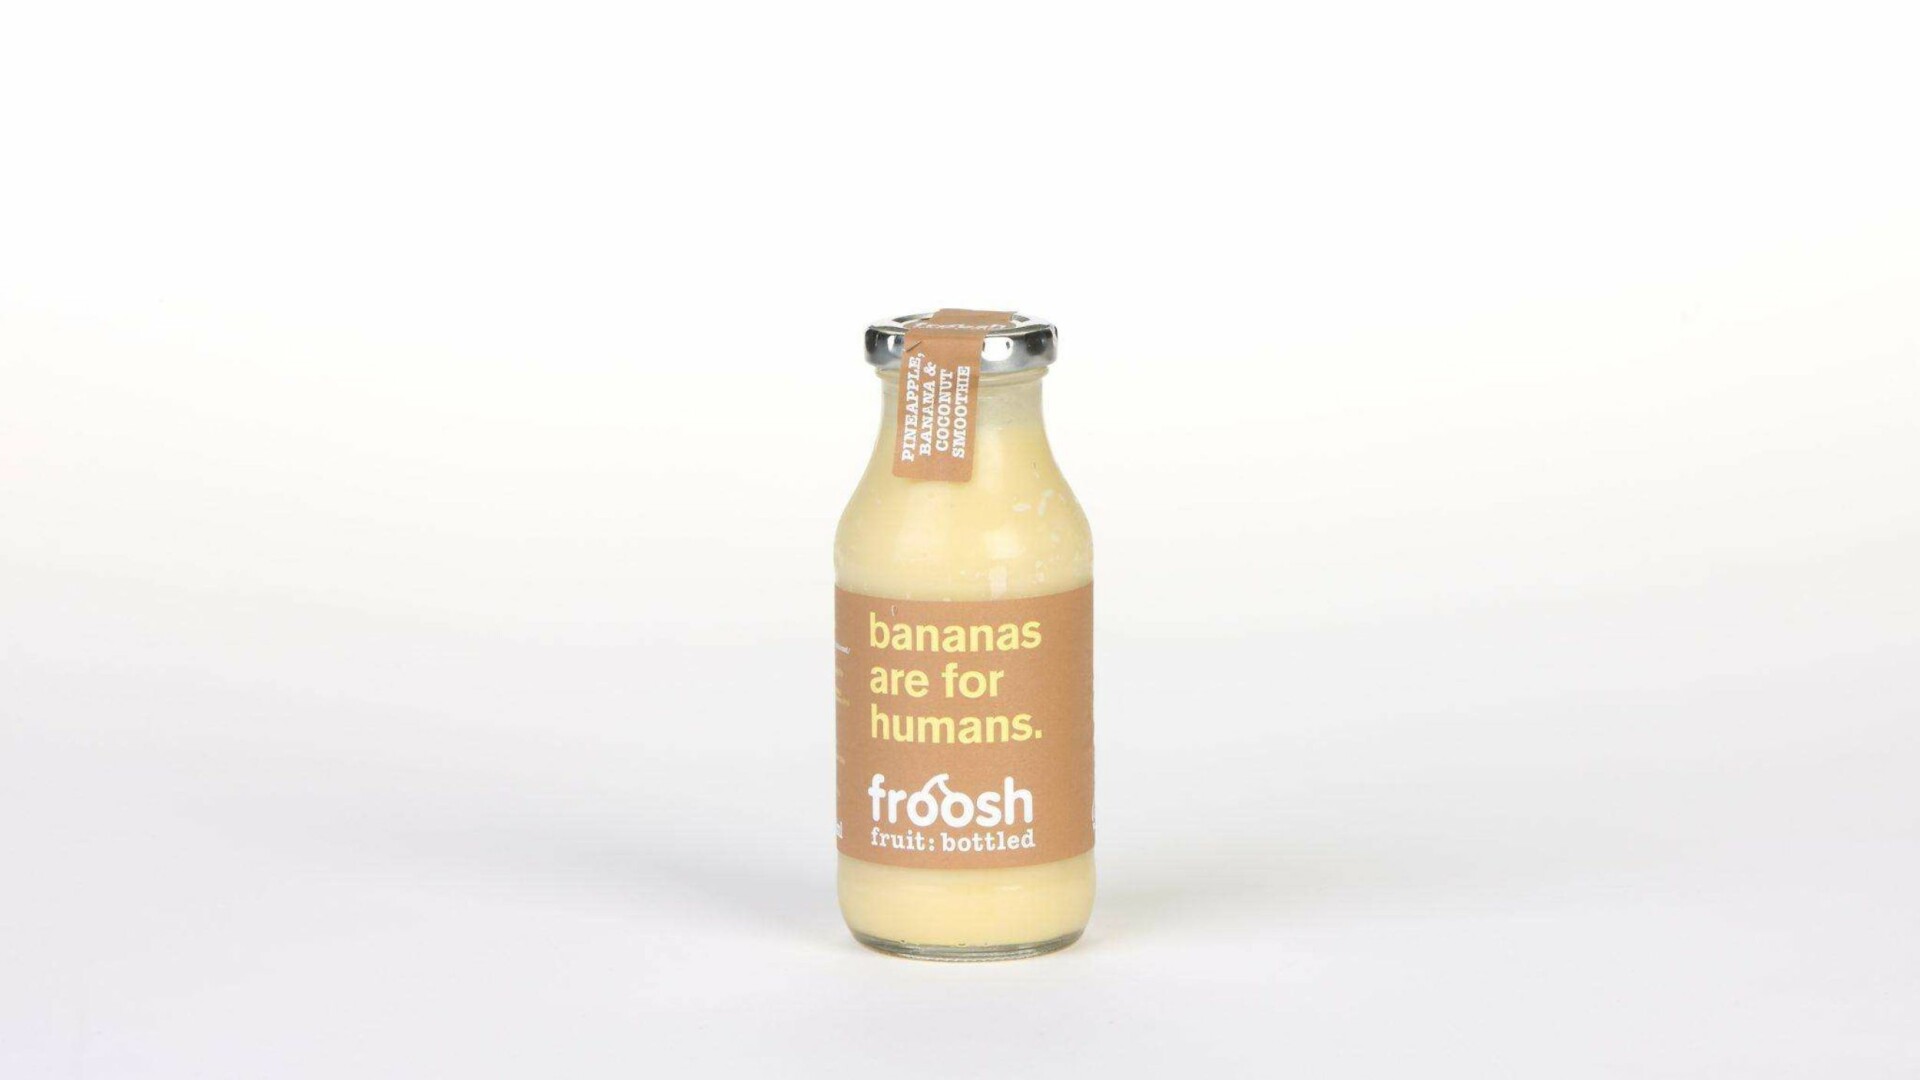 Froosh pineapple, banana and coconut smoothie - Helse